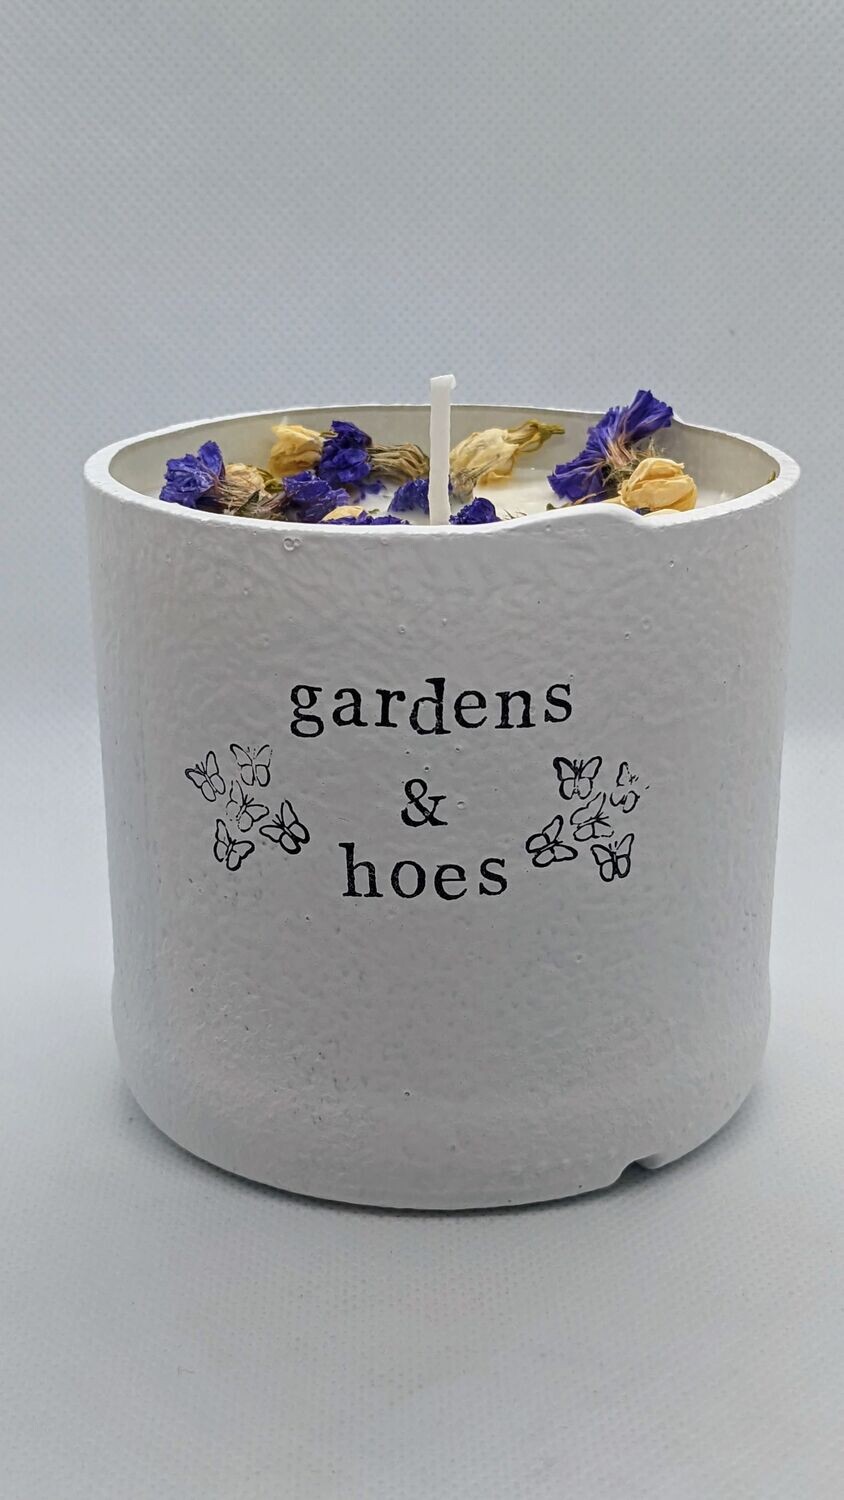 "Gardens & Hoes" toasty campfire scented soy wax candle with dried flowers and cotton wick